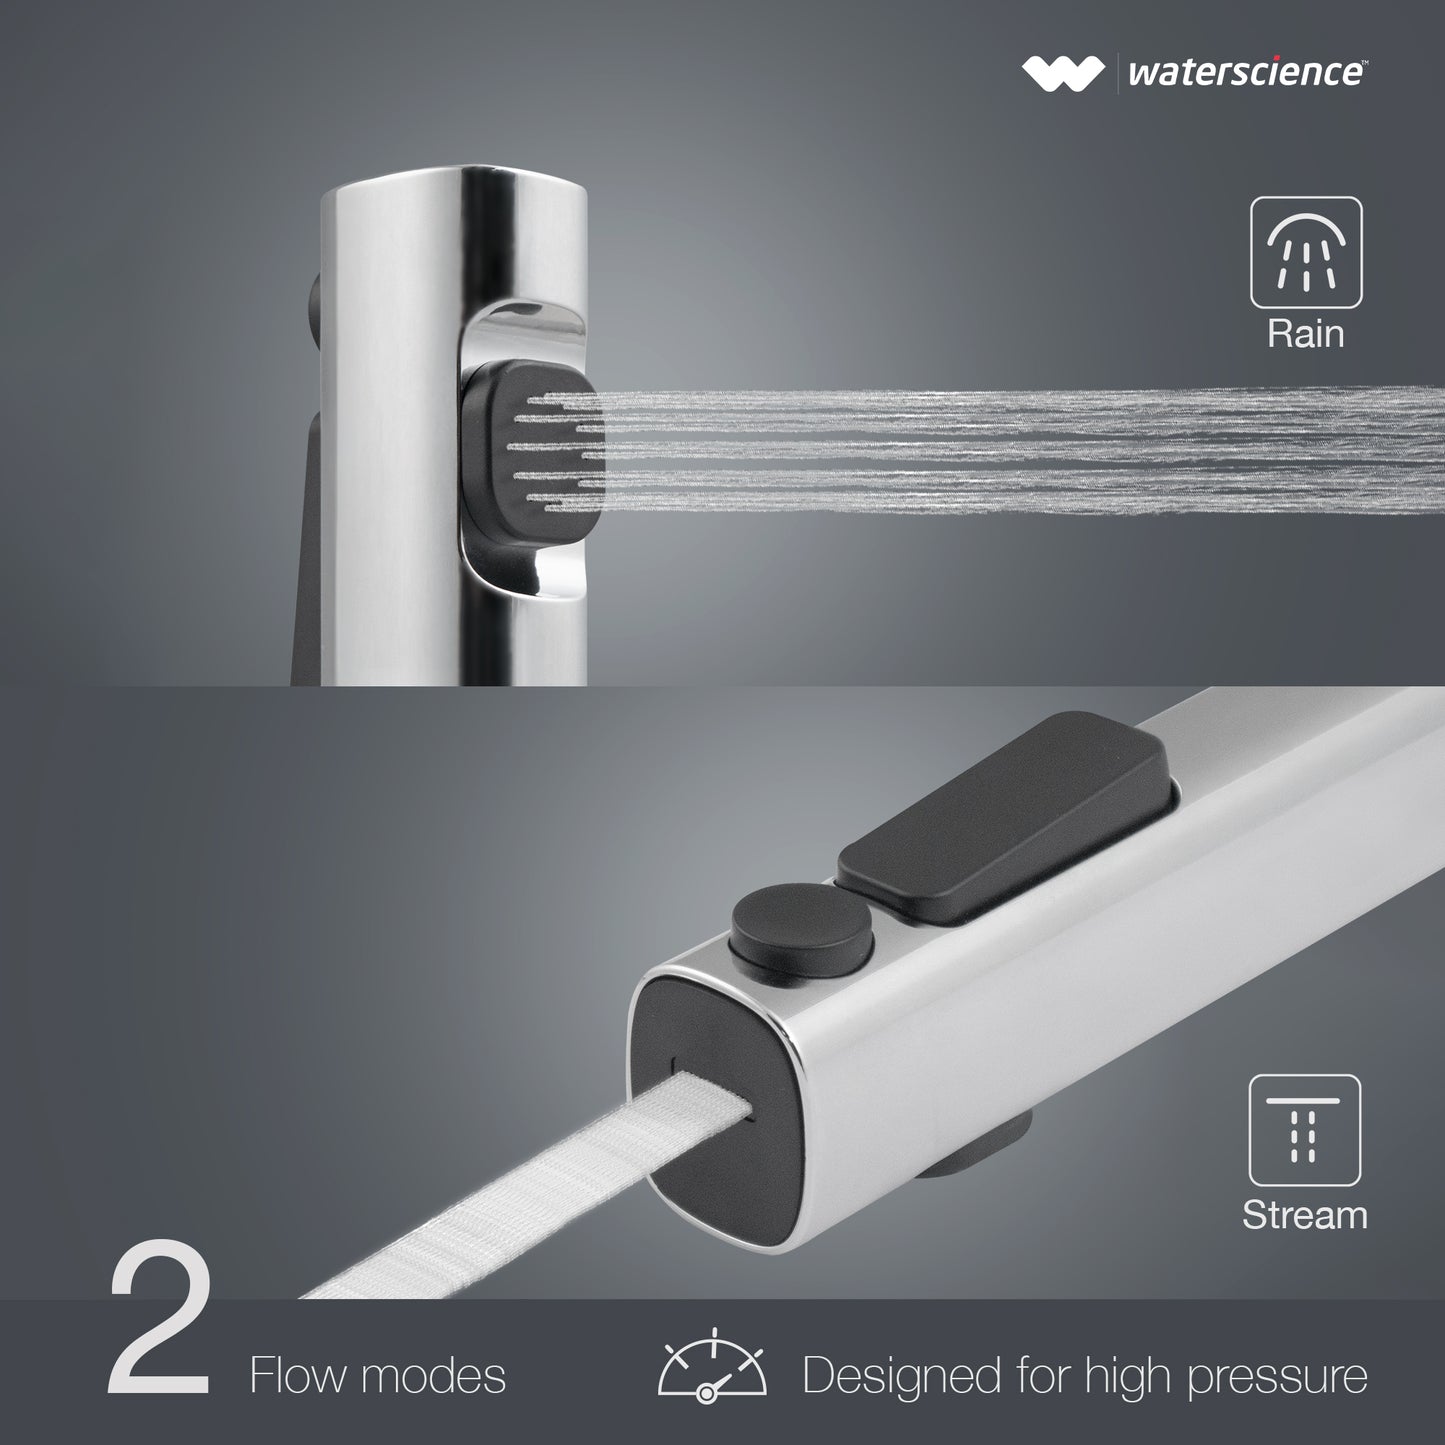 Water Saving Combo Pack - Multi Flow Shower Filter + Kitchen Tap extender + Health Faucet